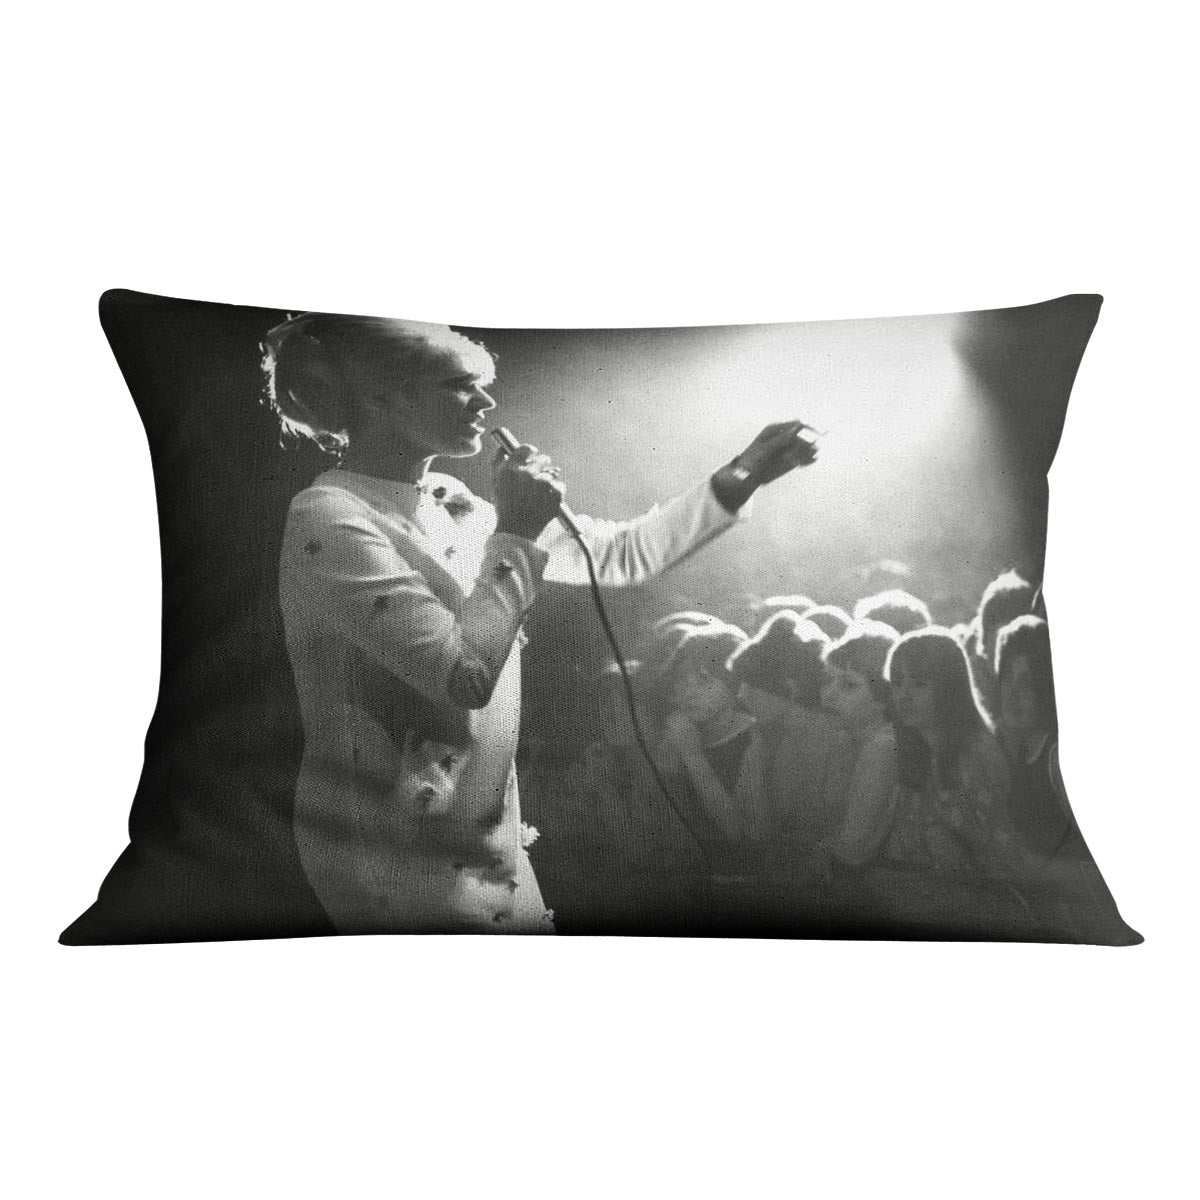 Dusty Springfield in the light Cushion